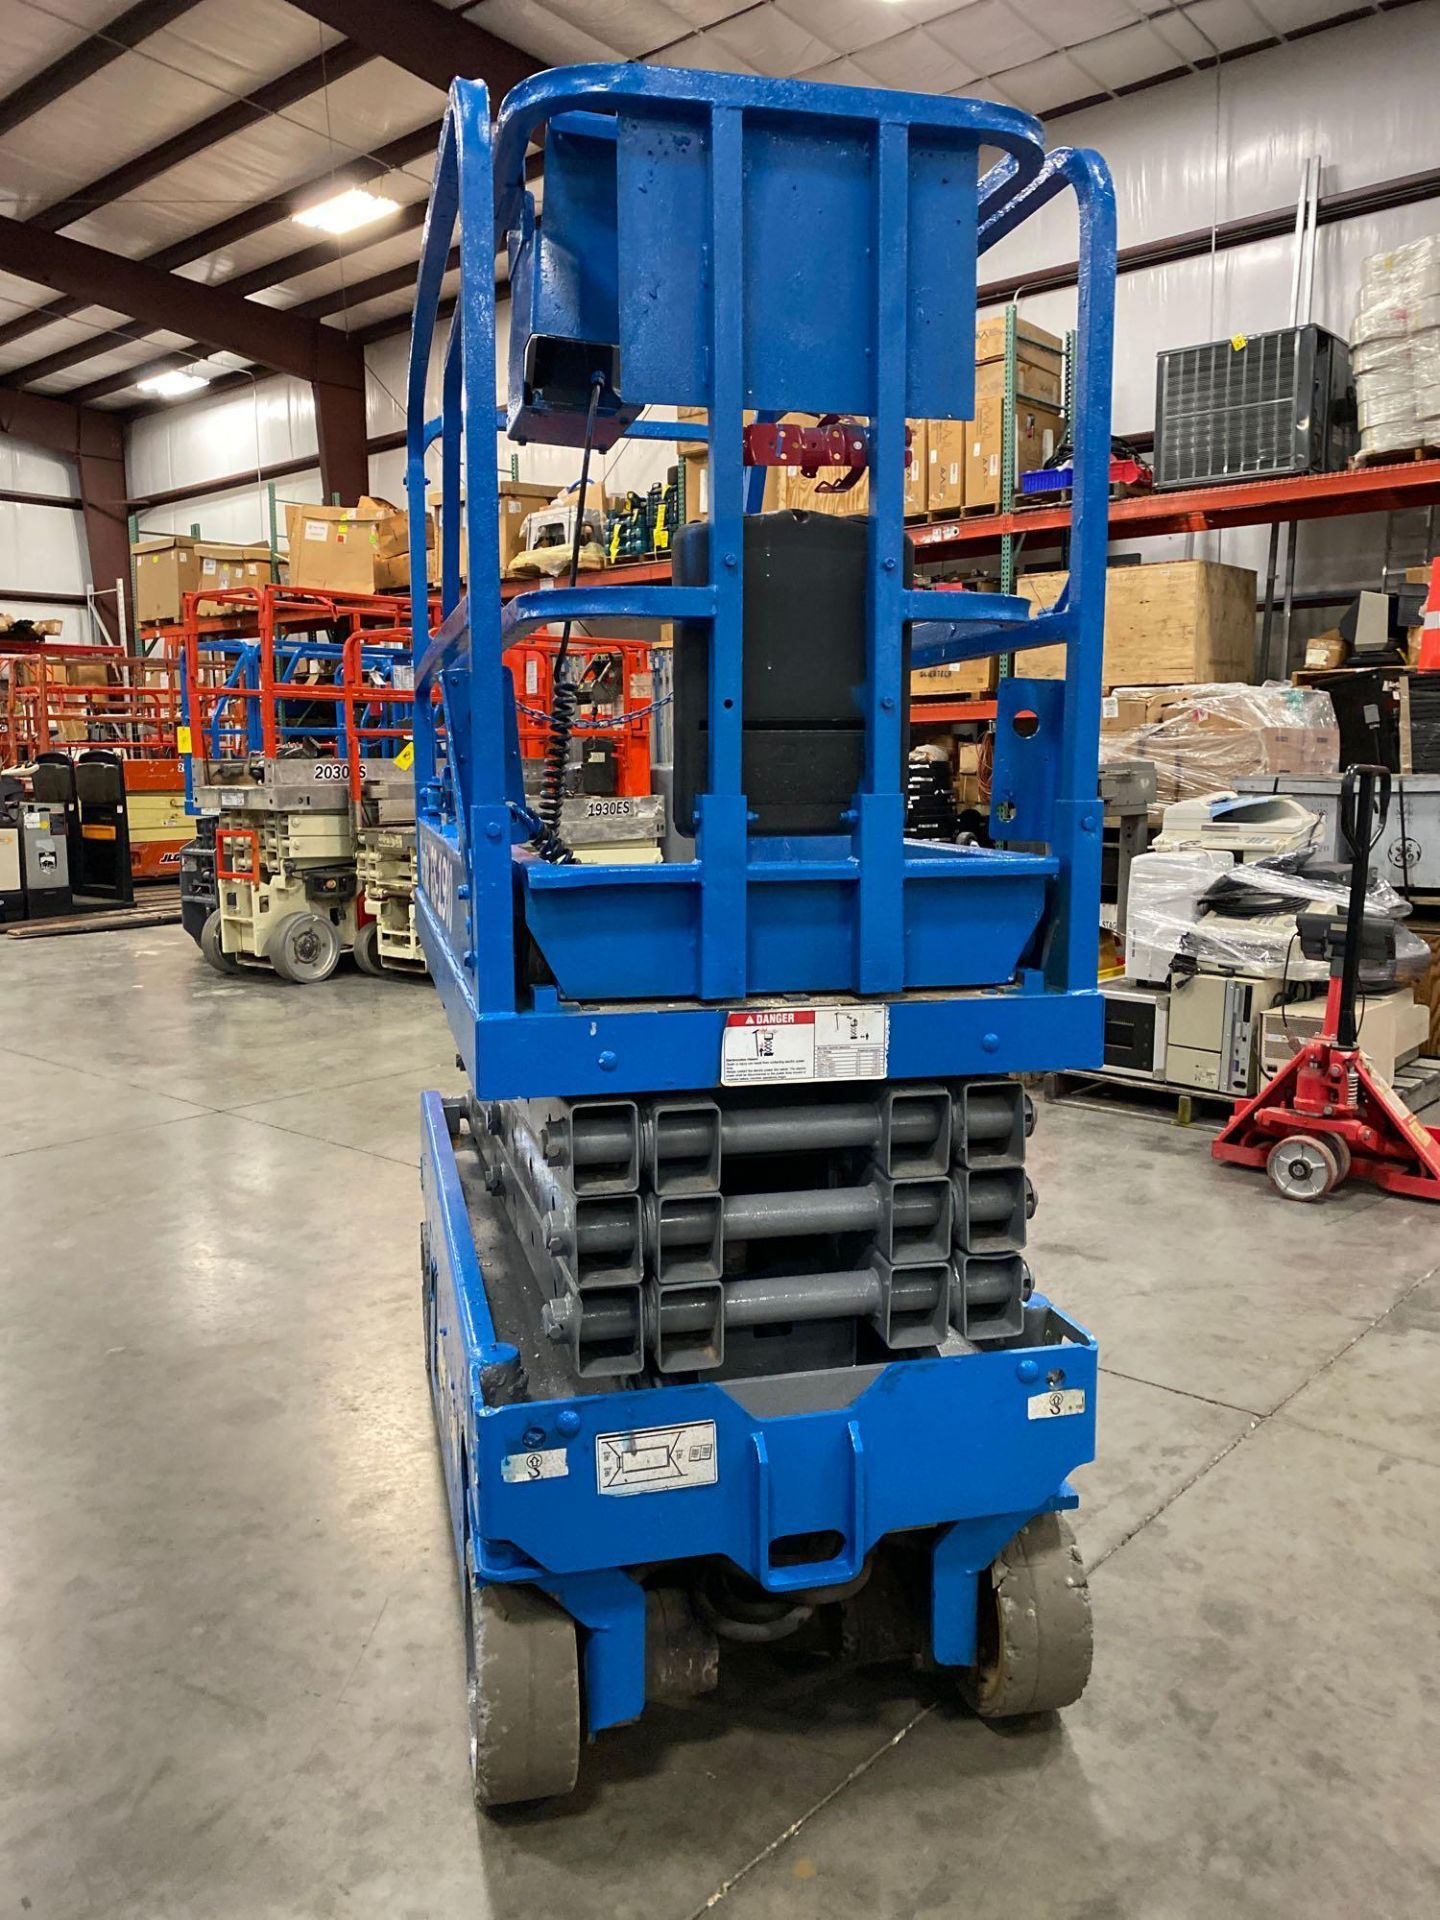 GENIE GS1930 SCISSOR LIFT, SELF PROPELLED, 19' PLATFORM HEIGHT, BUILT IN BATTERY CHARGER, SLIDE OUT - Image 7 of 12